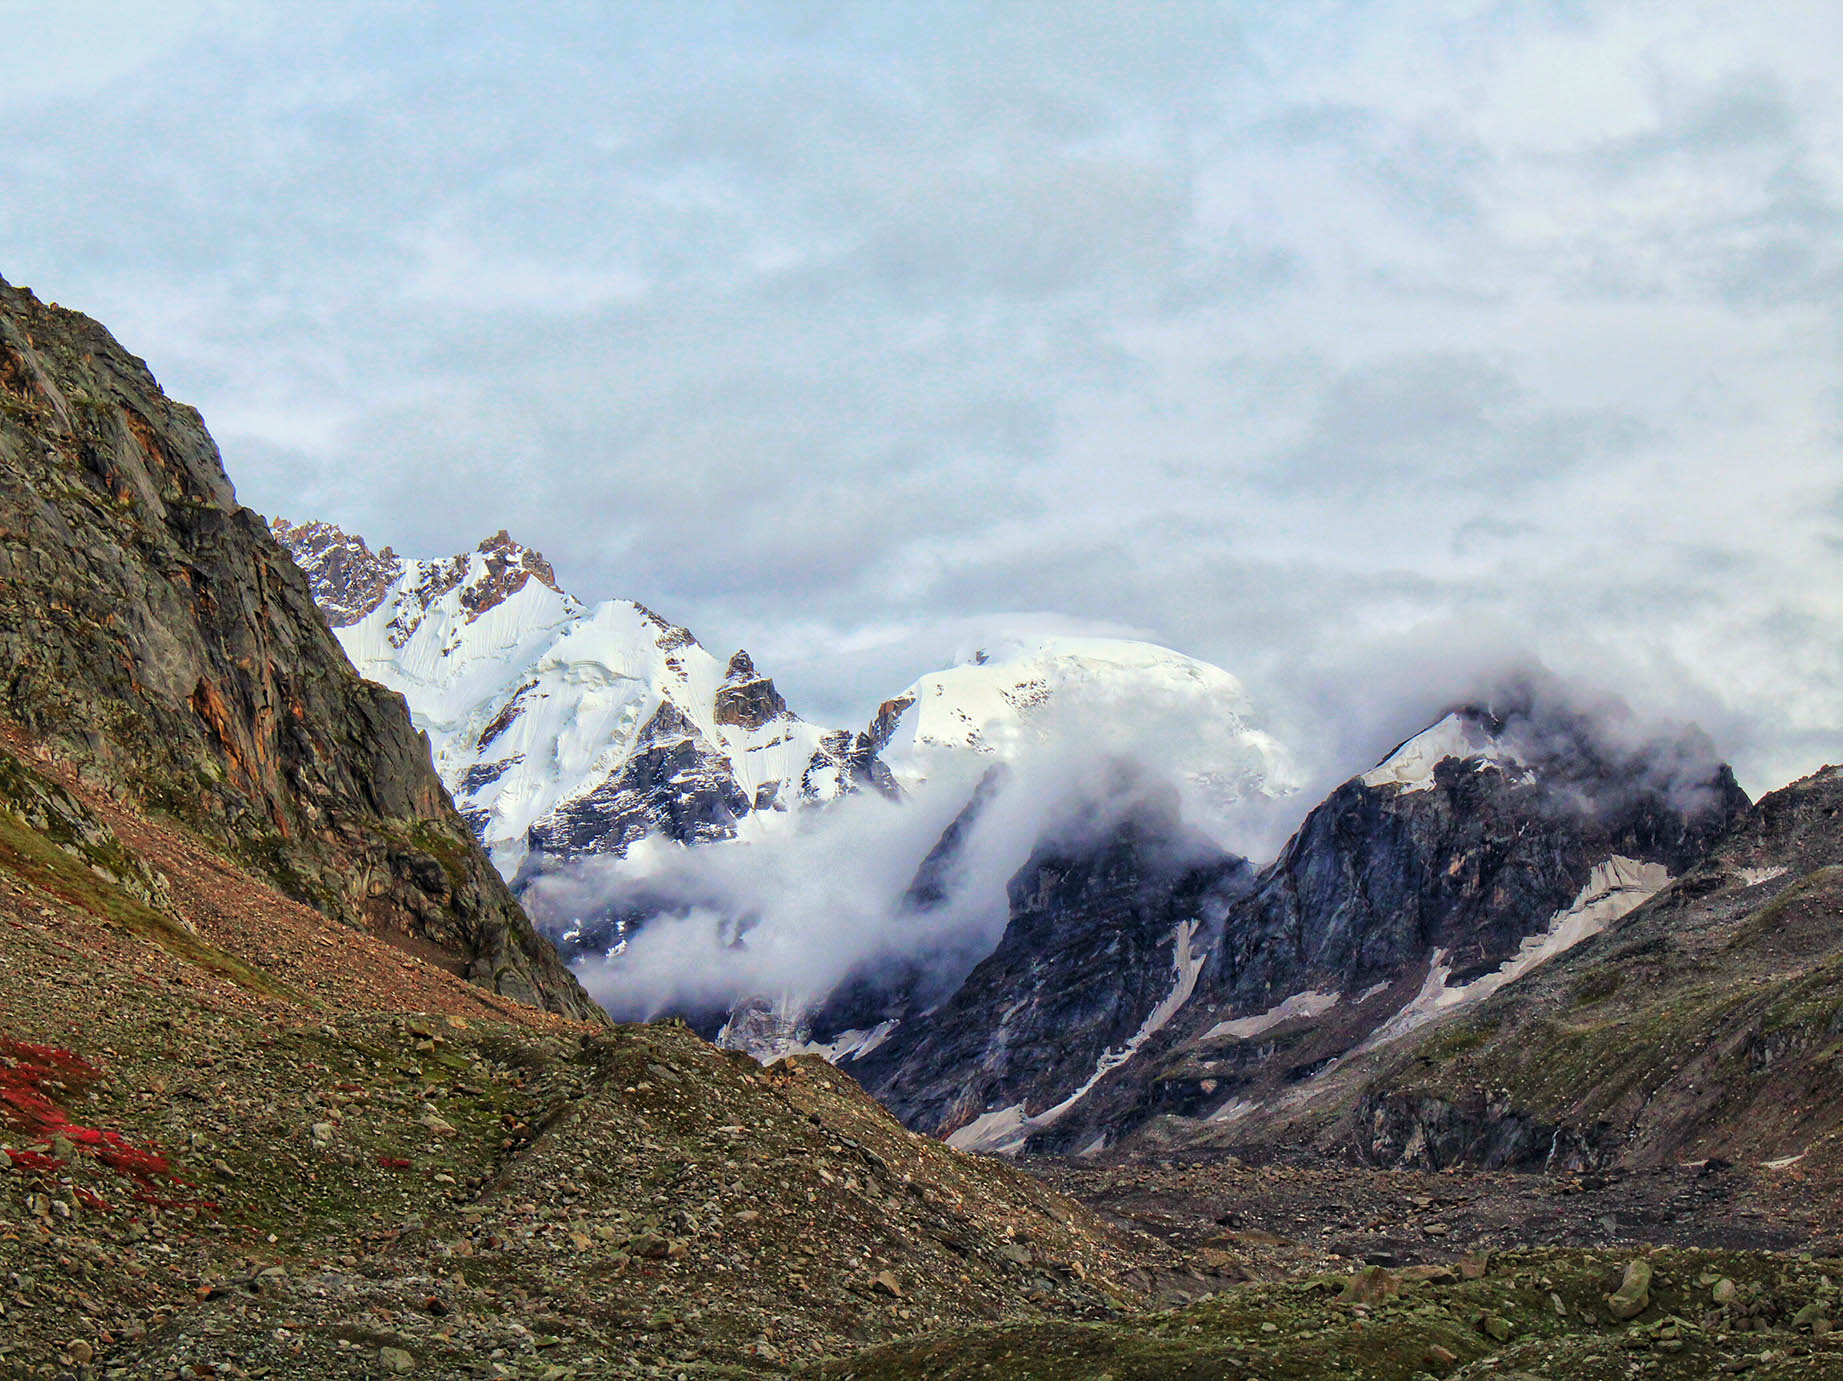 On a clear day, Hampta Pass offers a breathtaking view